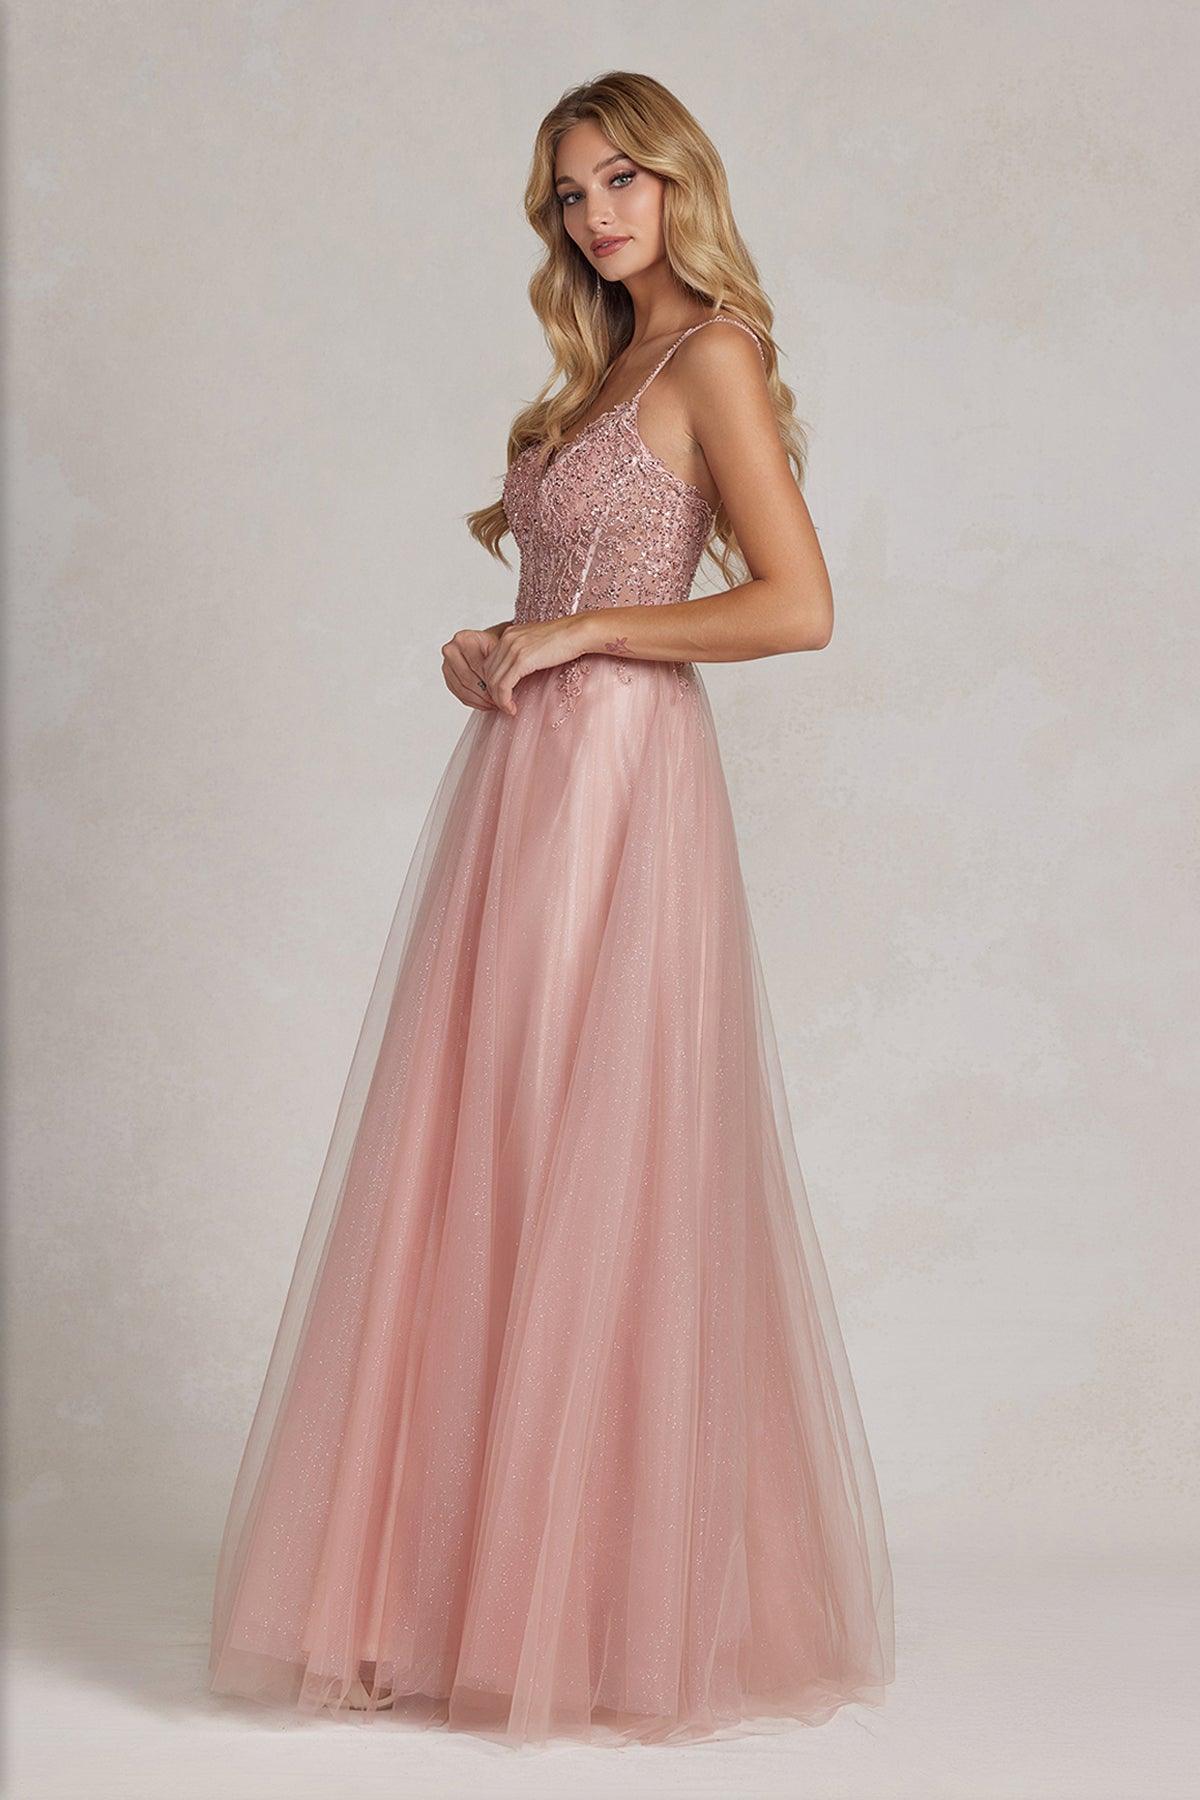 Nox Anabel F1086 Long Spaghetti Strap Prom A Line Gown Rose Gold